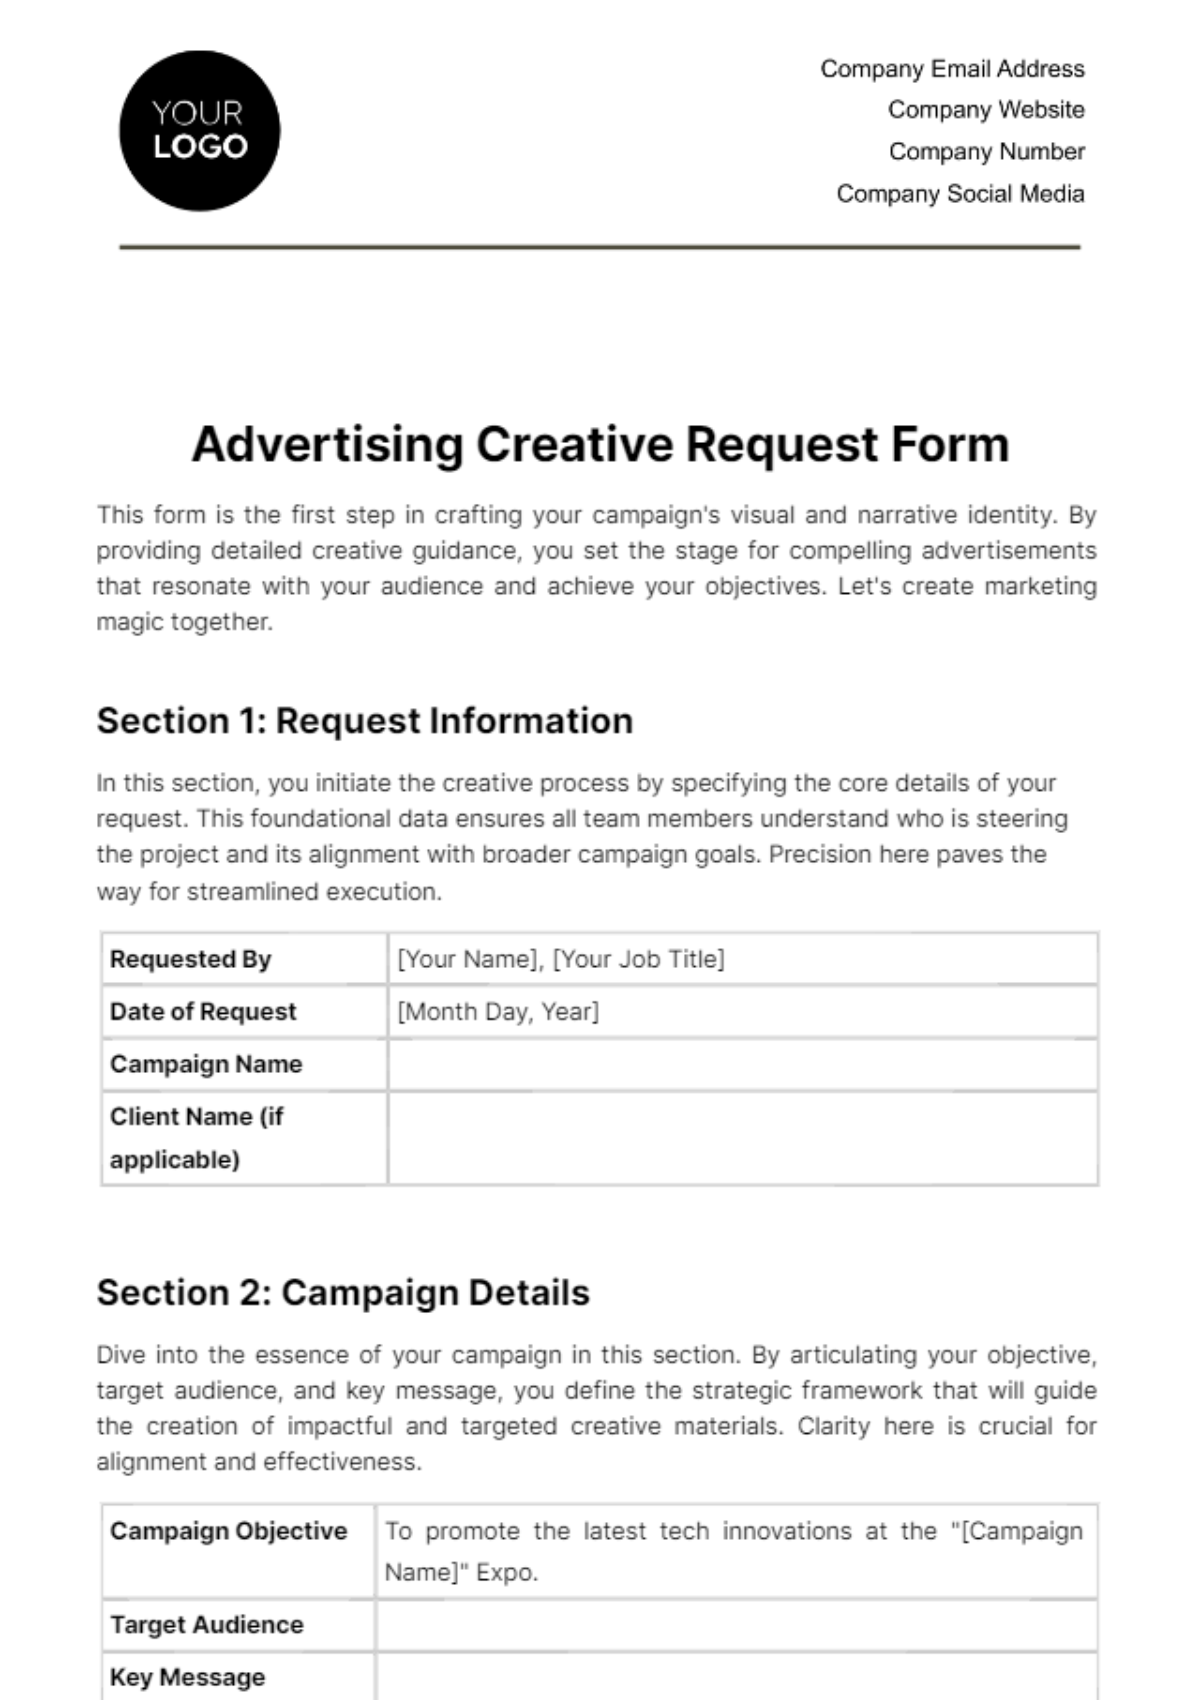 Advertising Creative Request Form Template